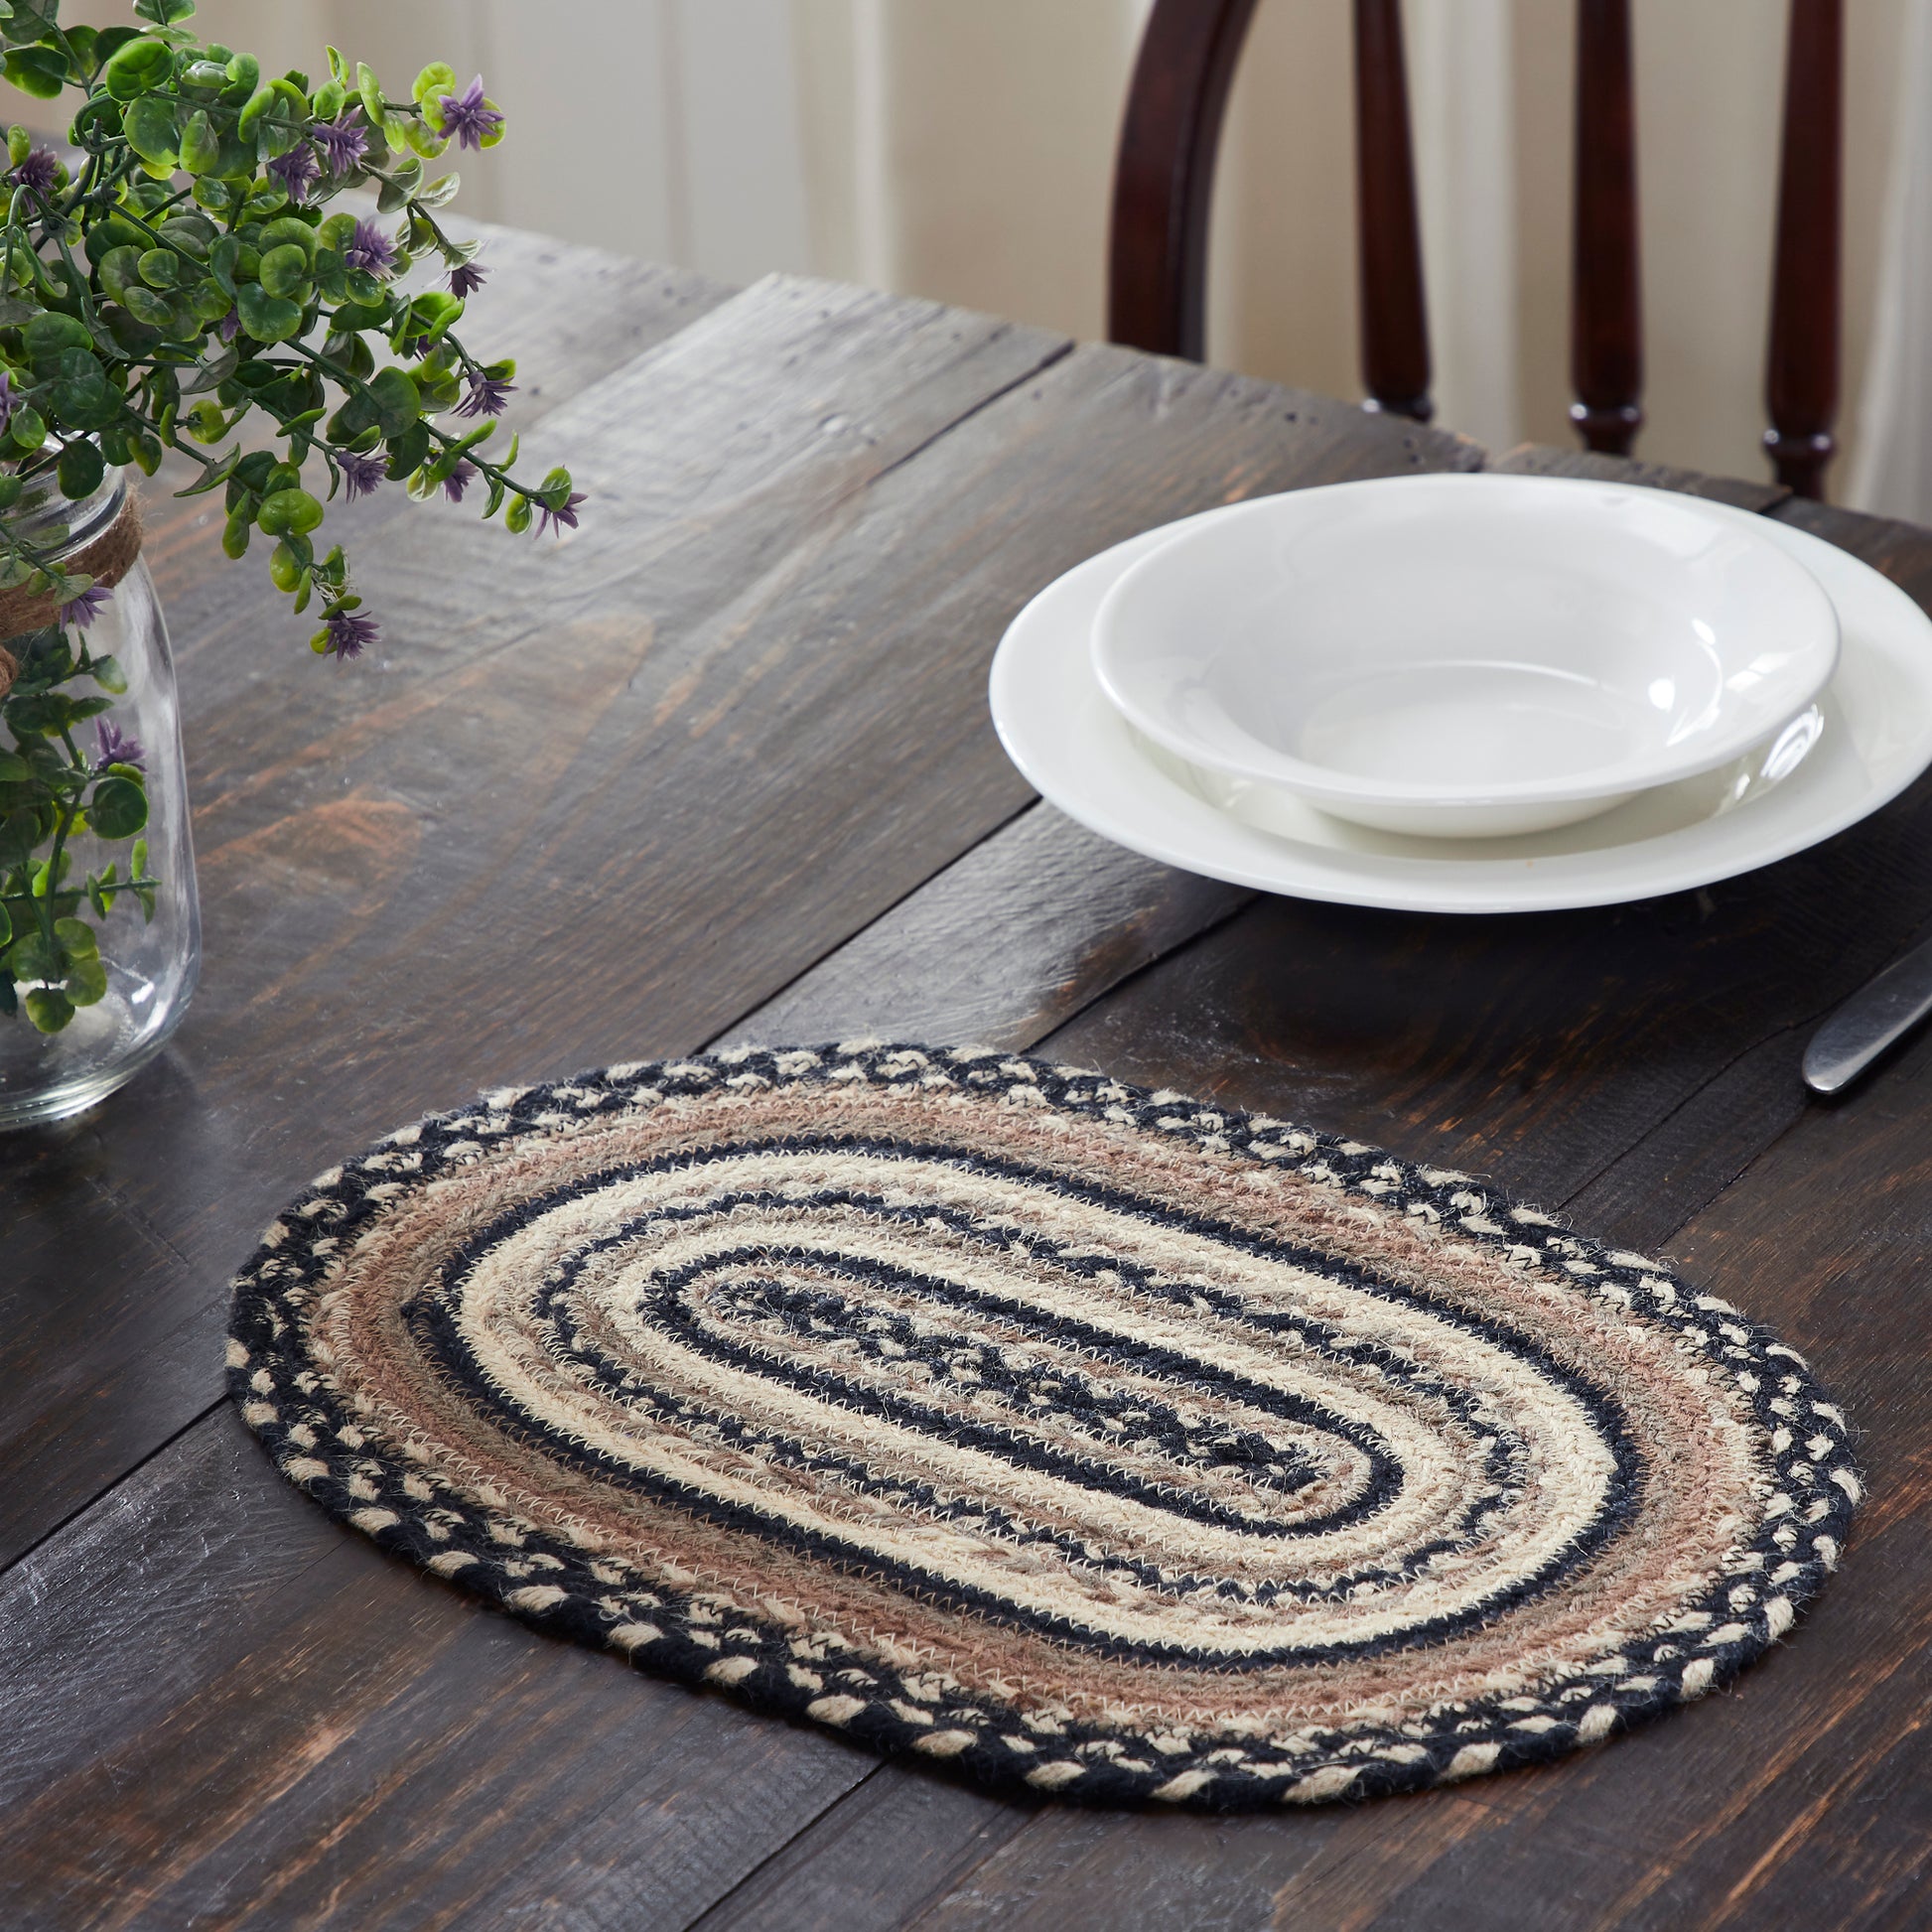 81447-Sawyer-Mill-Charcoal-Creme-Jute-Oval-Placemat-10x15-image-5